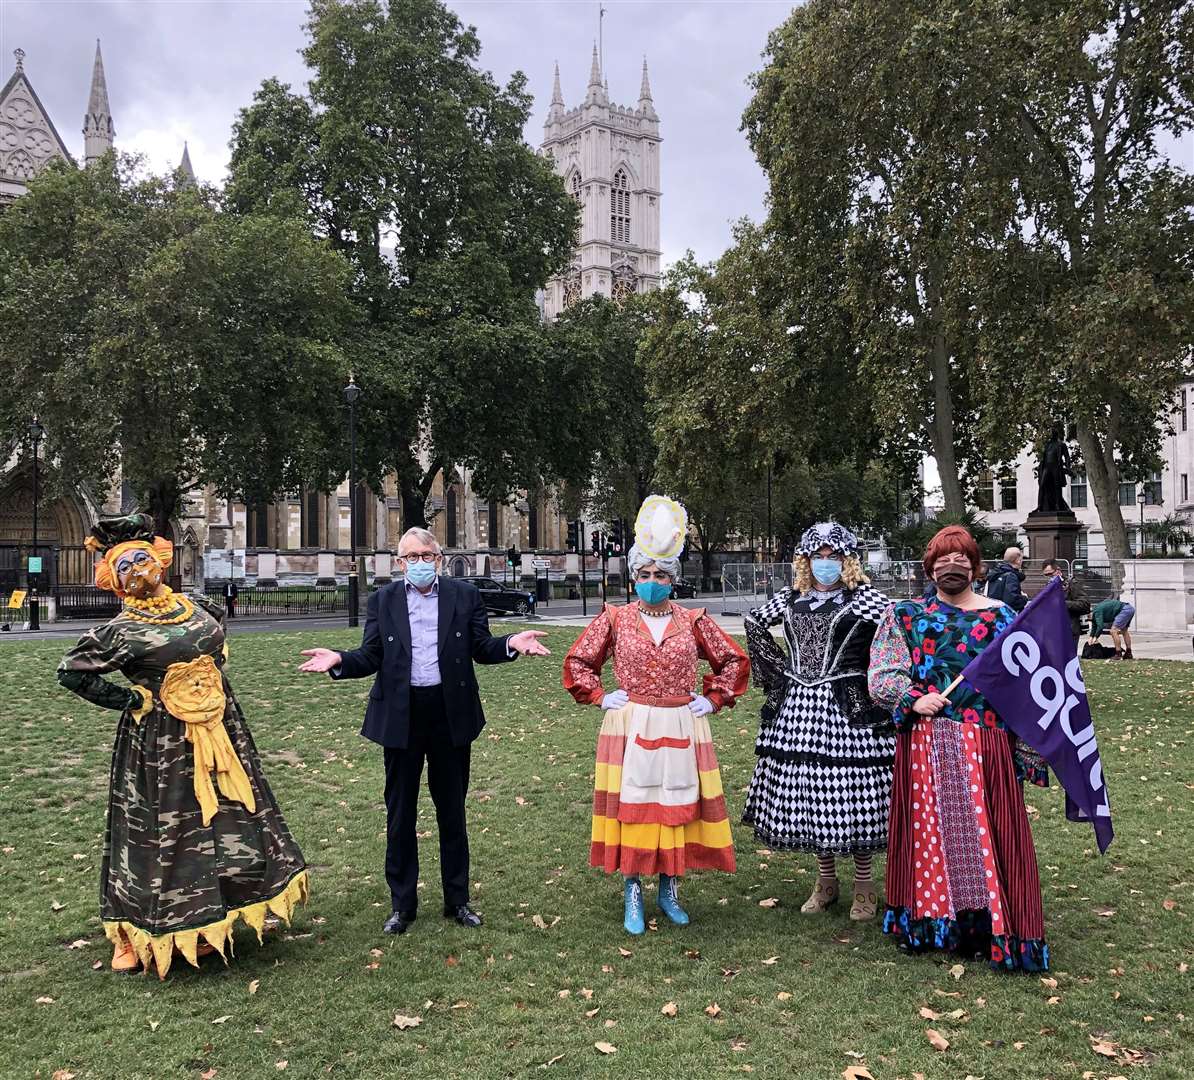 North MP Jamie Stone with some of the protesting panto dames in Parliament Square.